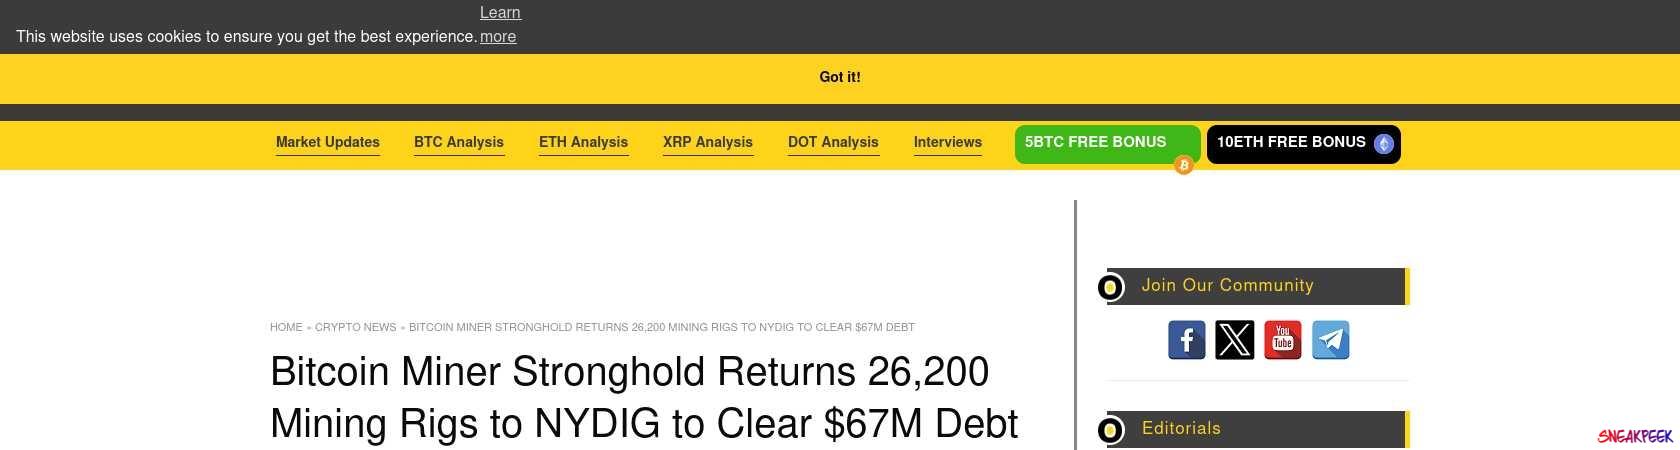 Read the full Article:  ⭲ Bitcoin Miner Stronghold Returns 26,200 Mining Rigs to NYDIG to Clear $67M Debt